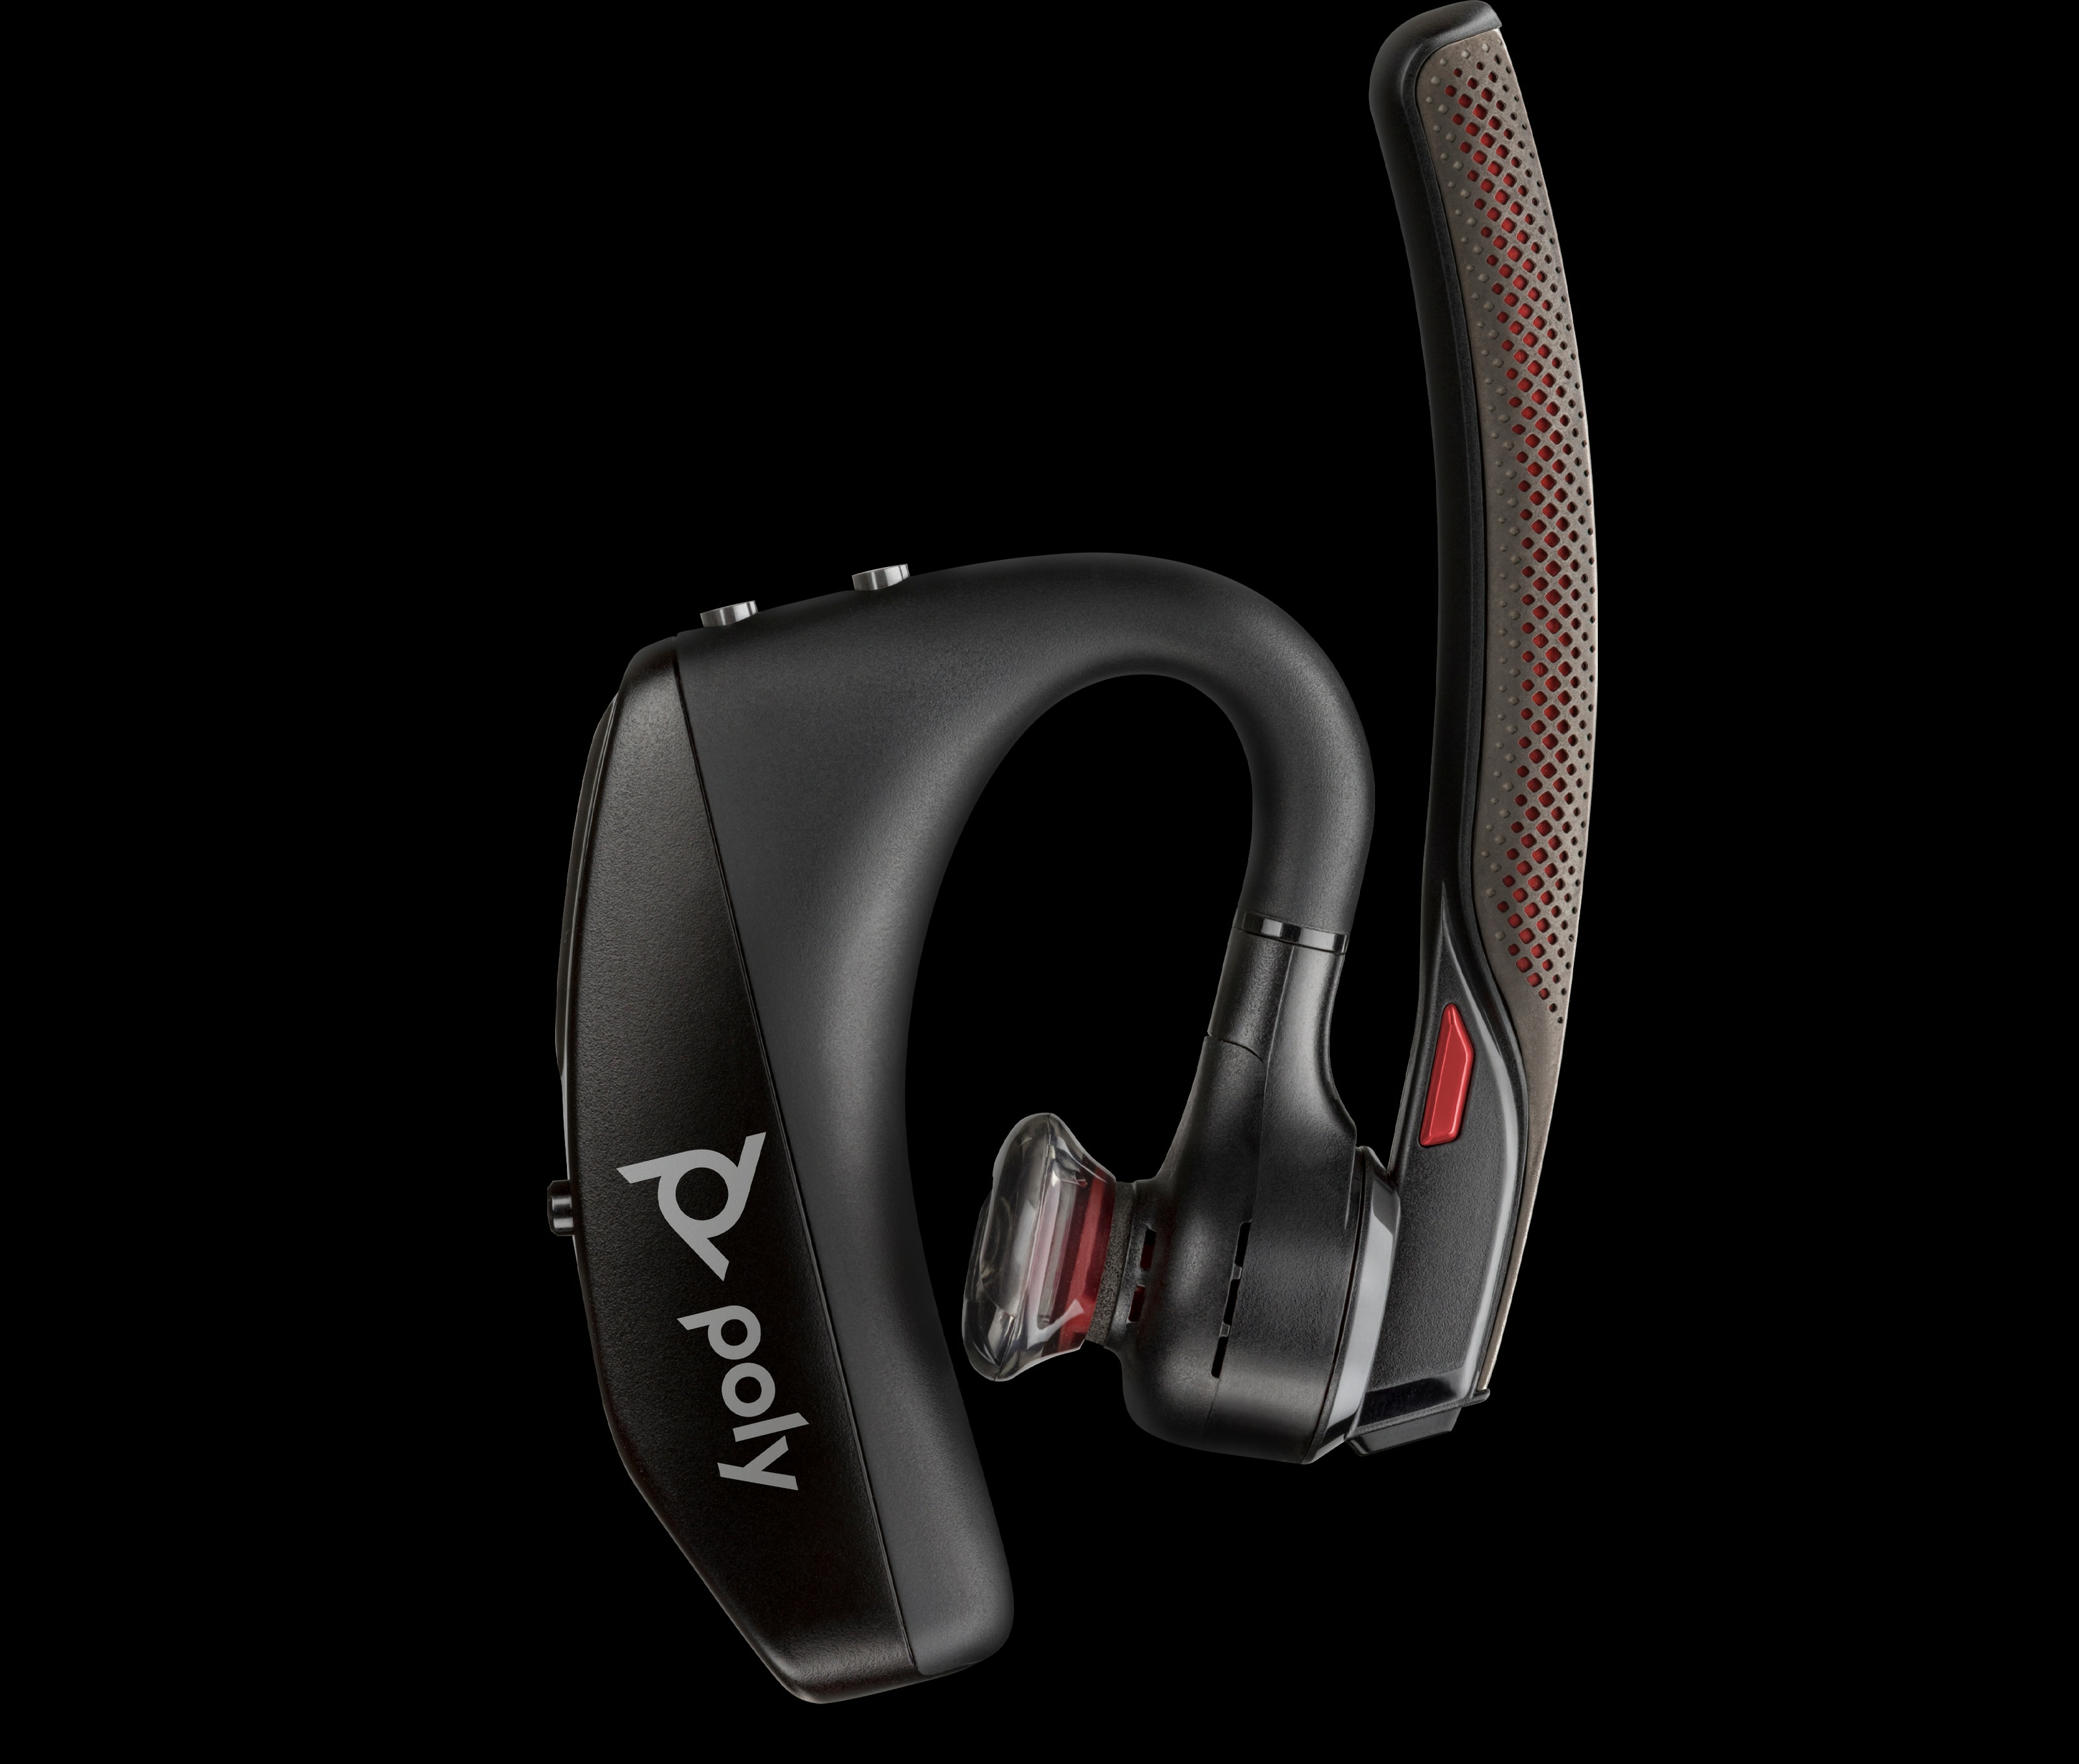 POLY Voyager 5200 USB-A Office Headset